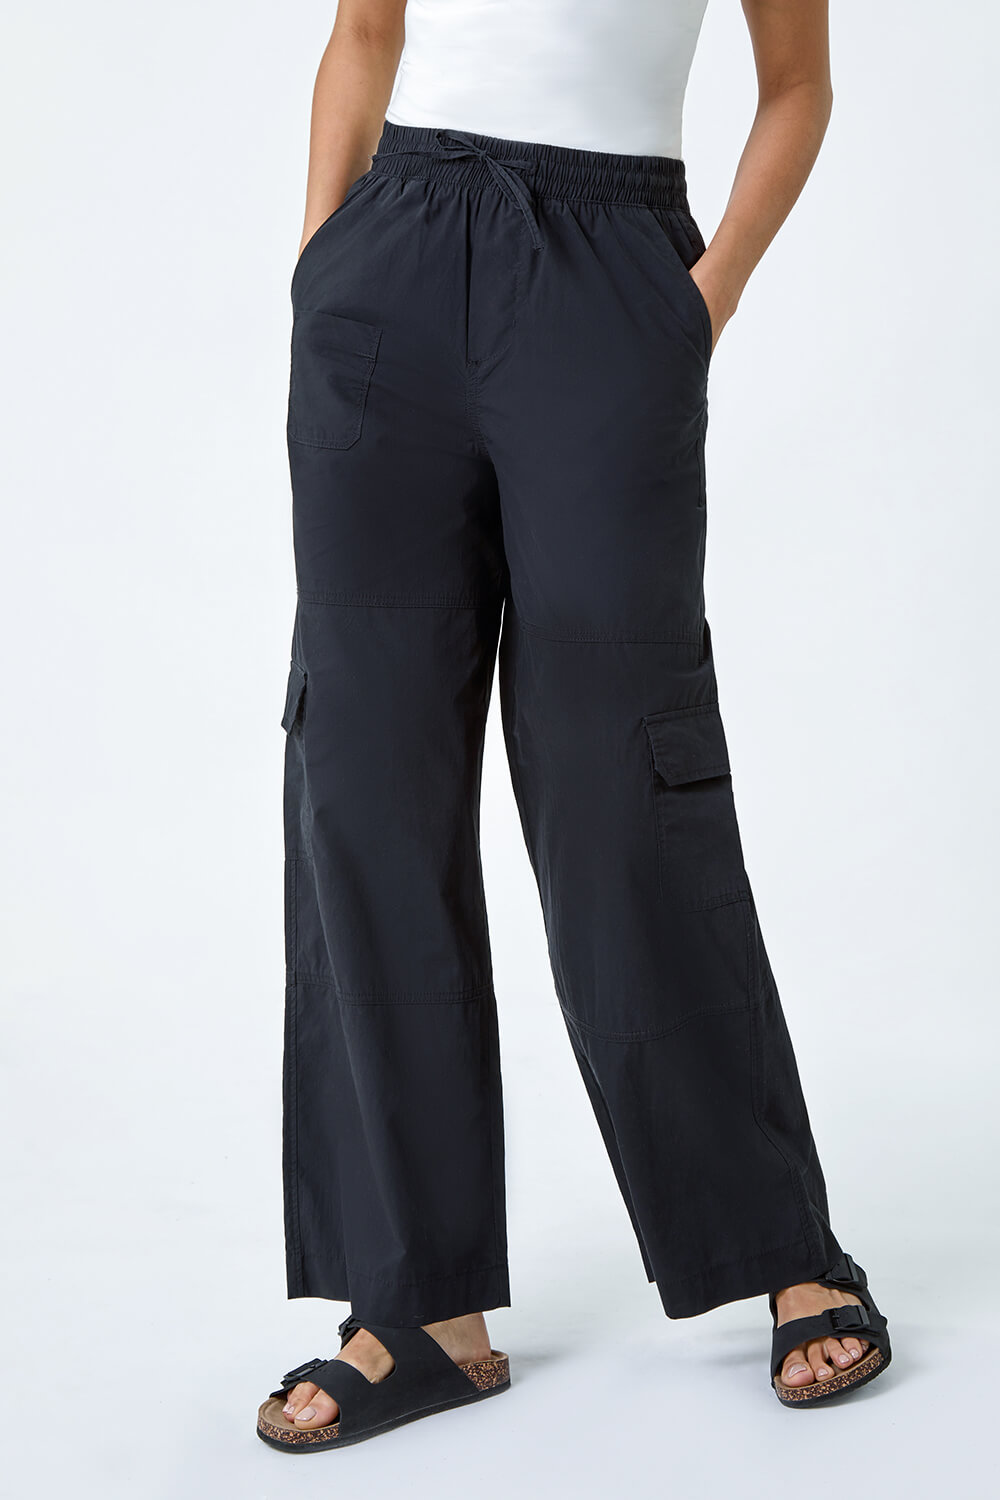 Black Cotton Wide Leg Cargo Trousers, Image 4 of 5